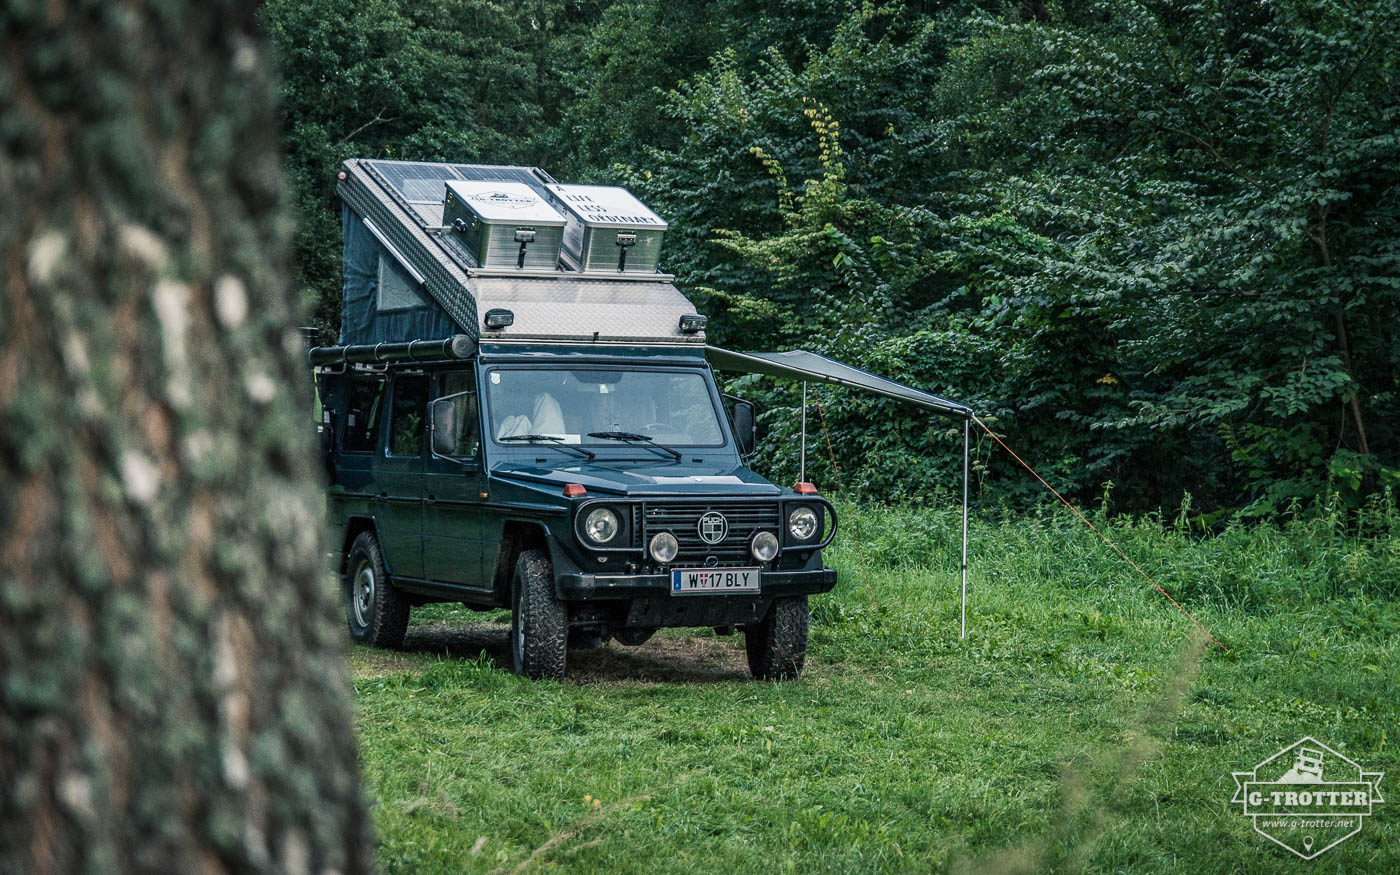 Campspot in Poland, mosquitos included.